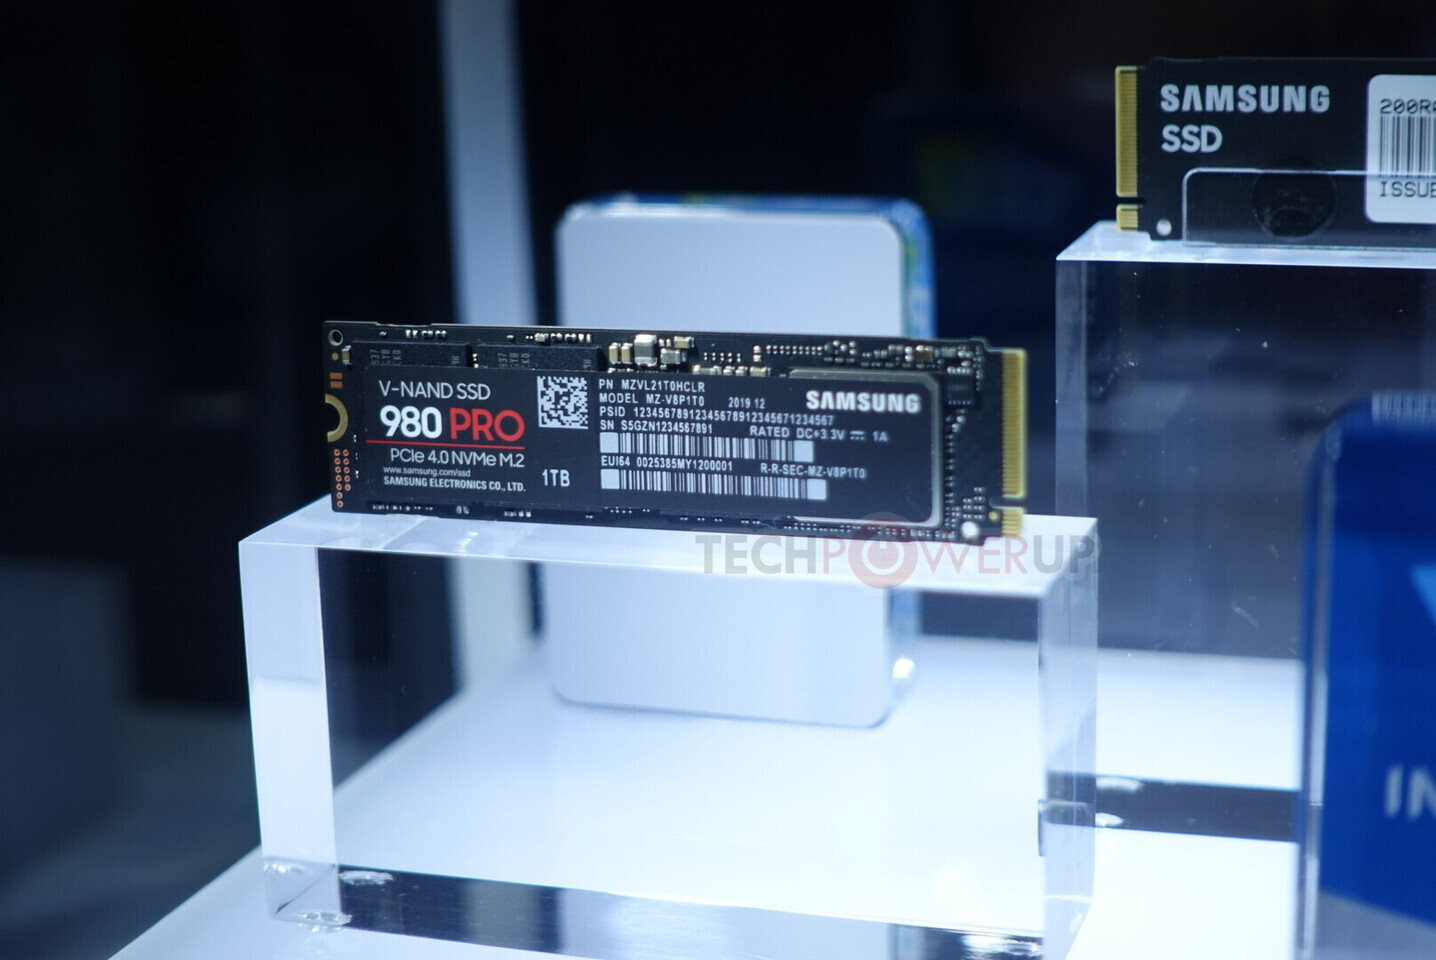 Samsung 980 Pro Pcie 4 0 Ssd Rumored To Launch Within Two Months Techpowerup Forums